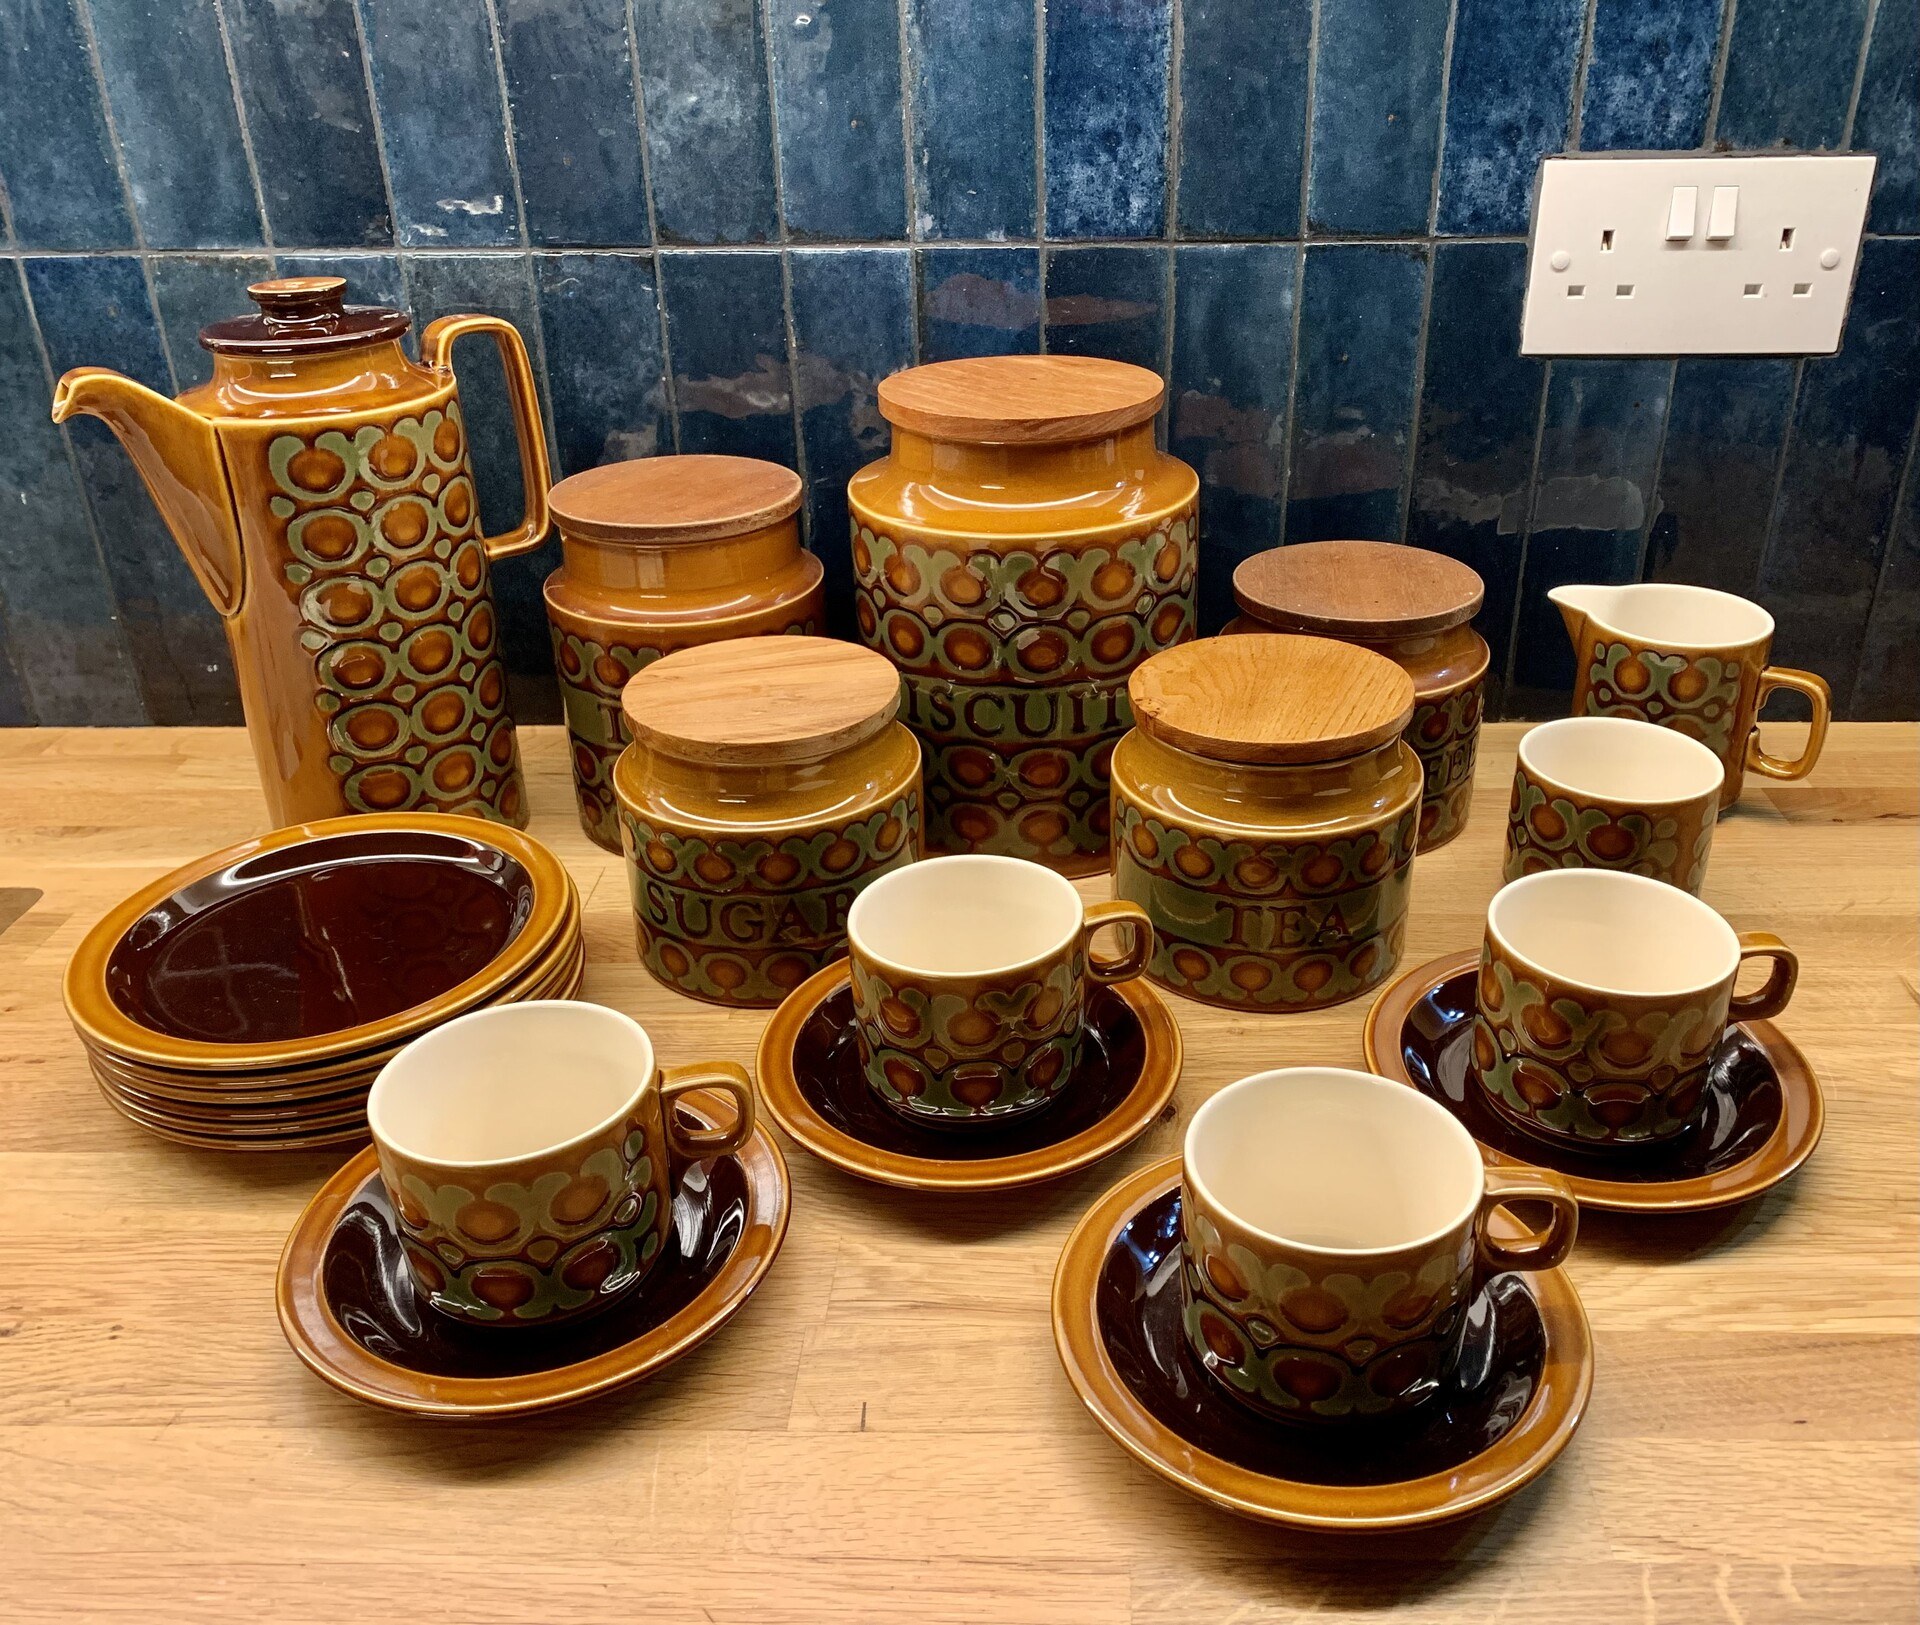 A nearly-full set of Hornsea Bronte tea set on our counter